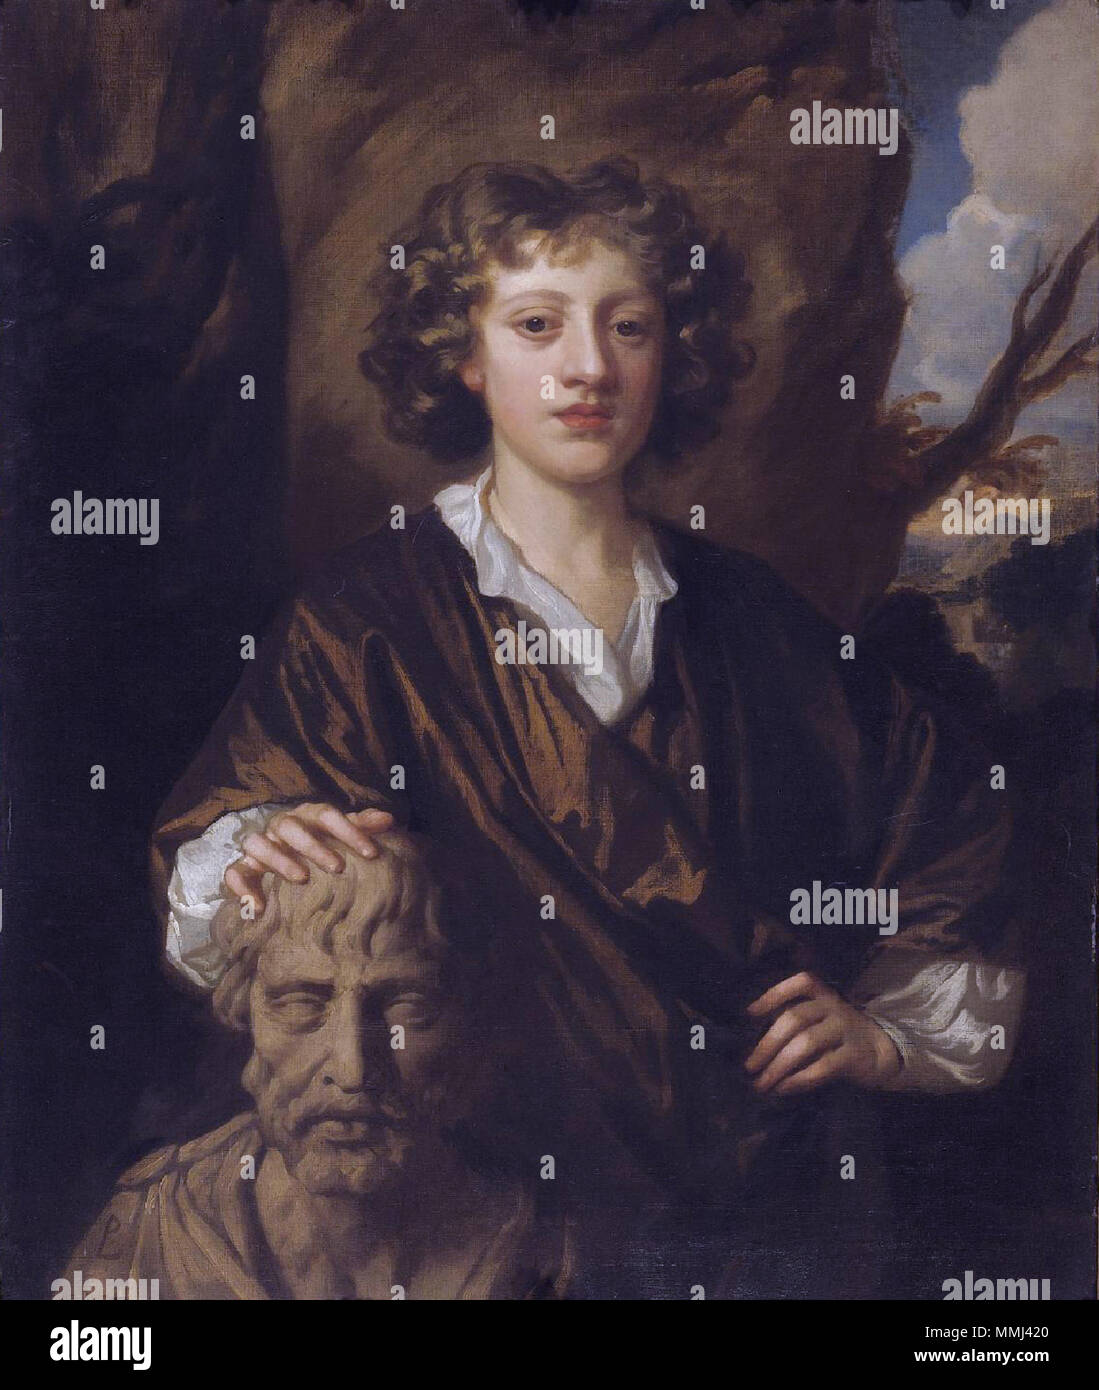 . Bartholomew Beale (1656-1709)  . circa 1670.   Peter Lely  (1618–1680)     Alternative names Sir Peter Lely, Peter Lelio, Peter Lilley, Peter Lilly, Peter Lylly, Pieter Lelij, Birth name: Pieter van der Faes  Description English painter and art collector  Date of birth/death 14 September 1618 30 November 1680  Location of birth/death Soest London  Work period between circa 1637 and circa 1680  Work location Haarlem (6 October 1637), London (1641-1680), Amsterdam (1656)  Authority control  : Q161336 VIAF:?47033545 ISNI:?0000 0000 8379 8302 ULAN:?500002184 LCCN:?n85028378 NLA:?35930356 WorldCa Stock Photo